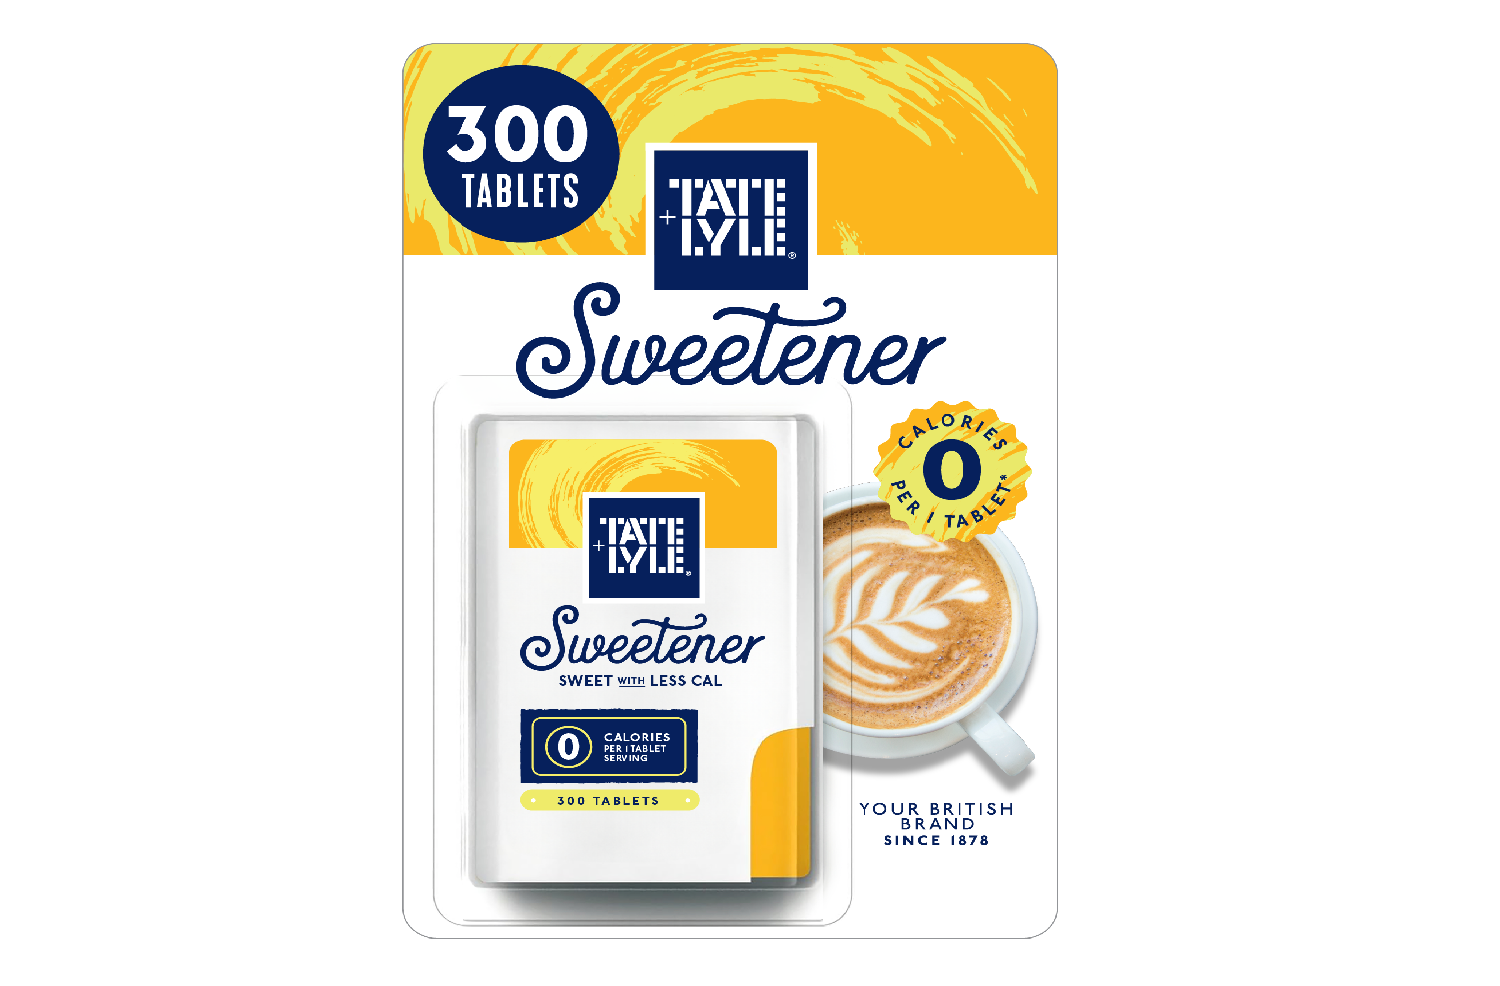 A packshot of Tate & Lyle's Sweetener Tablets. The Product contains 300 15g tablets. Writing on the packaging contains several sections of text: "Sweet With Less Cal" & "0 Calories Per Tablet Serving"